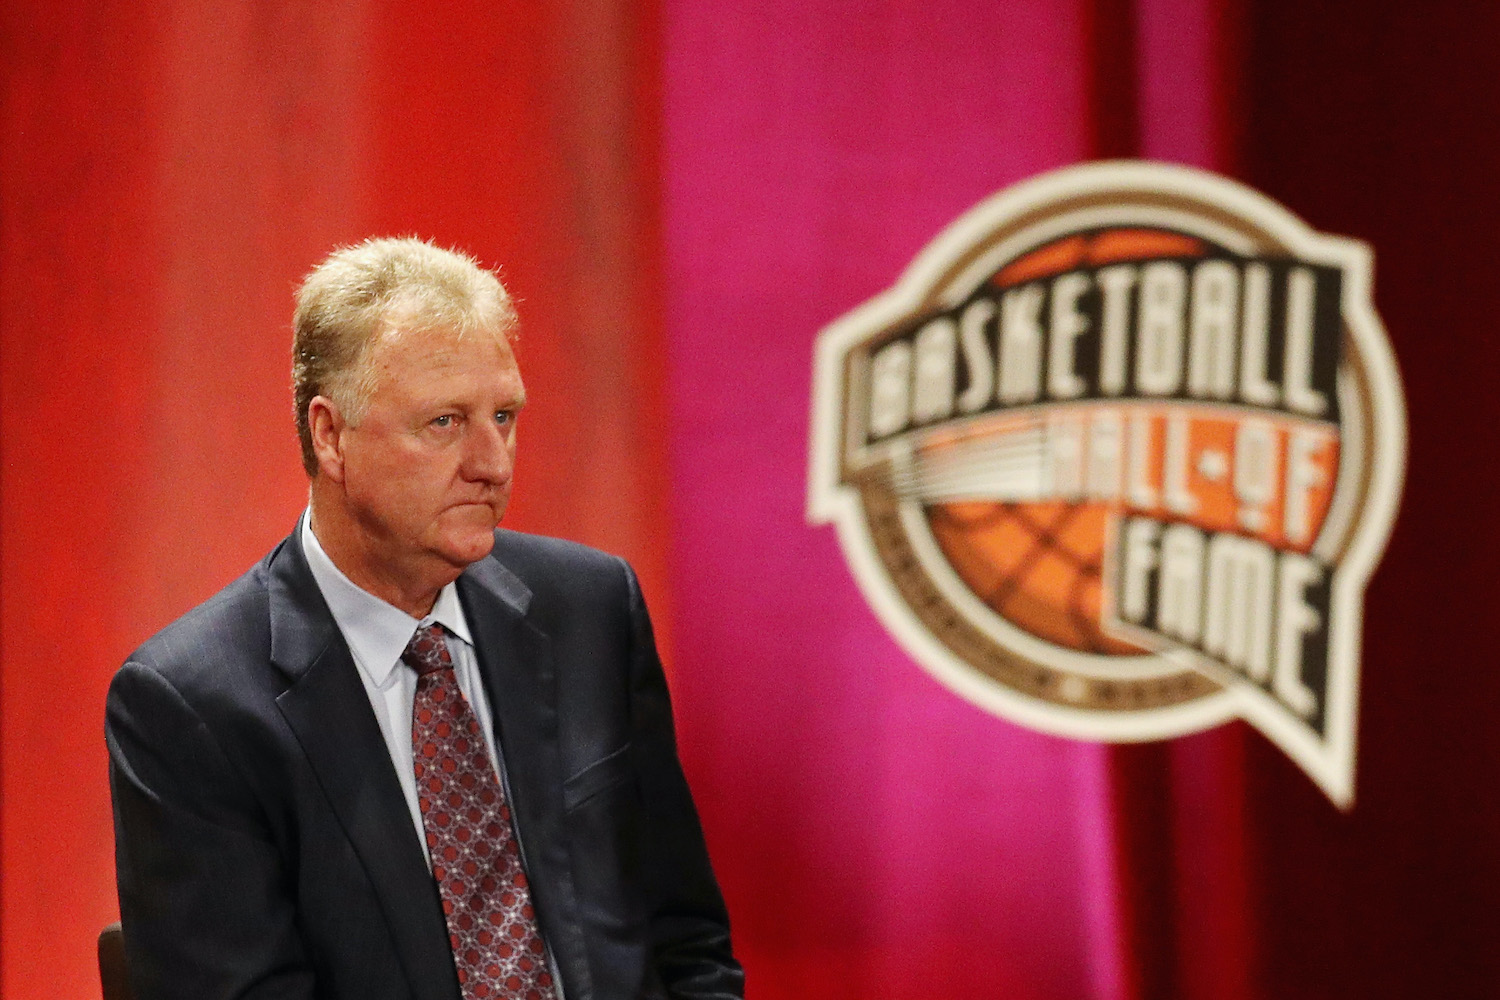 Larry Bird Made 24 Million In The Nba But Refused To Appear At A